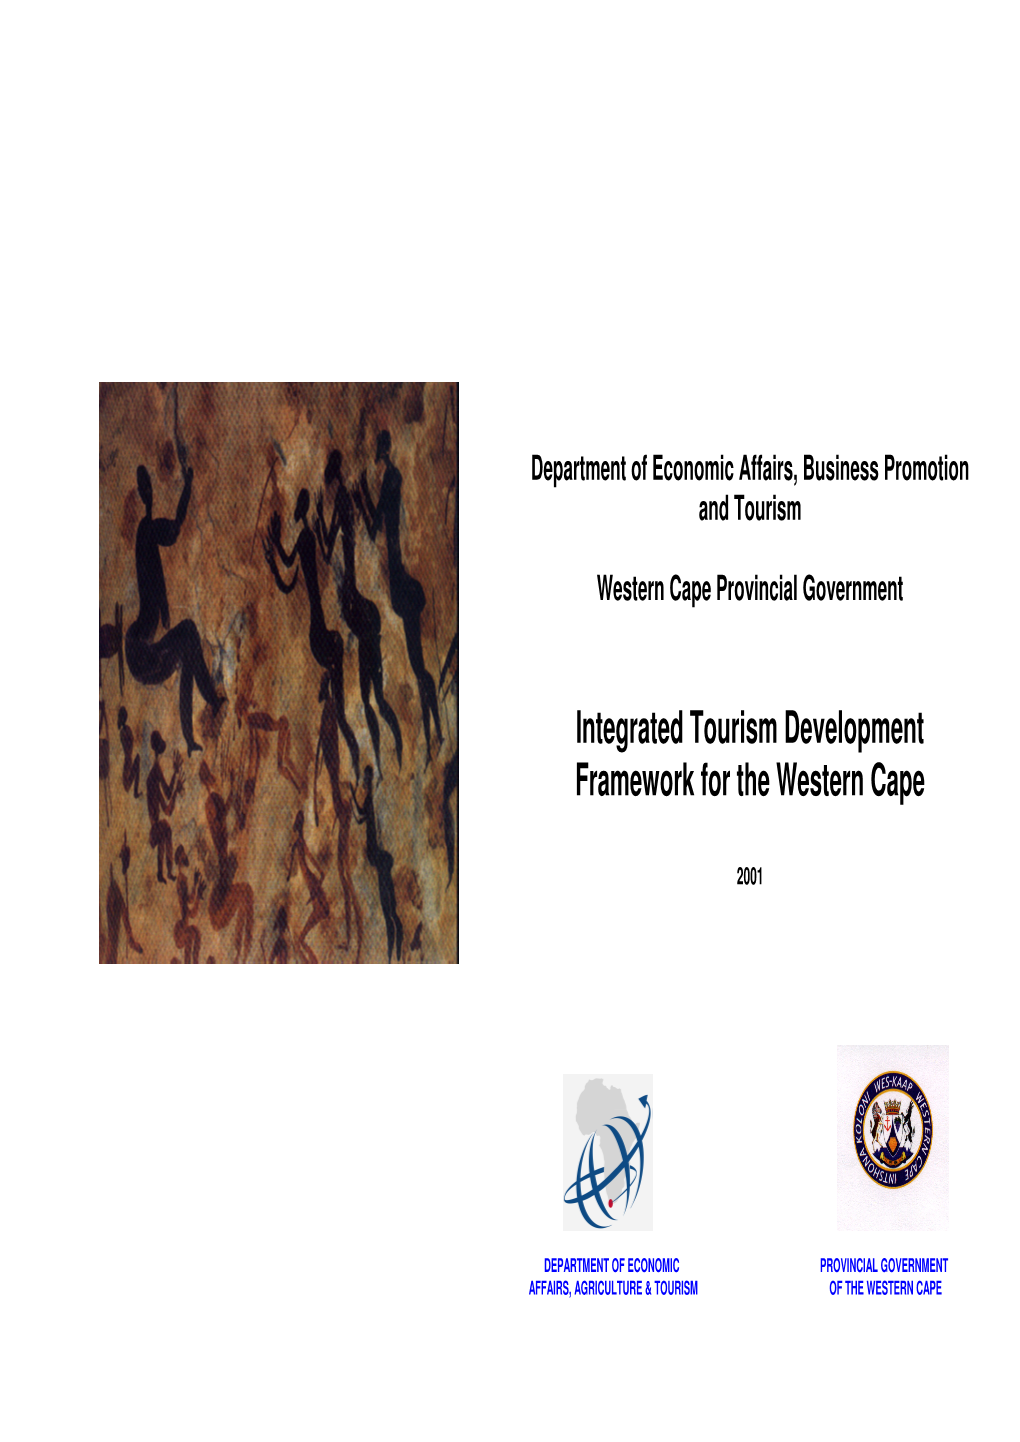 Integrated Tourism Development Framework for the Western Cape